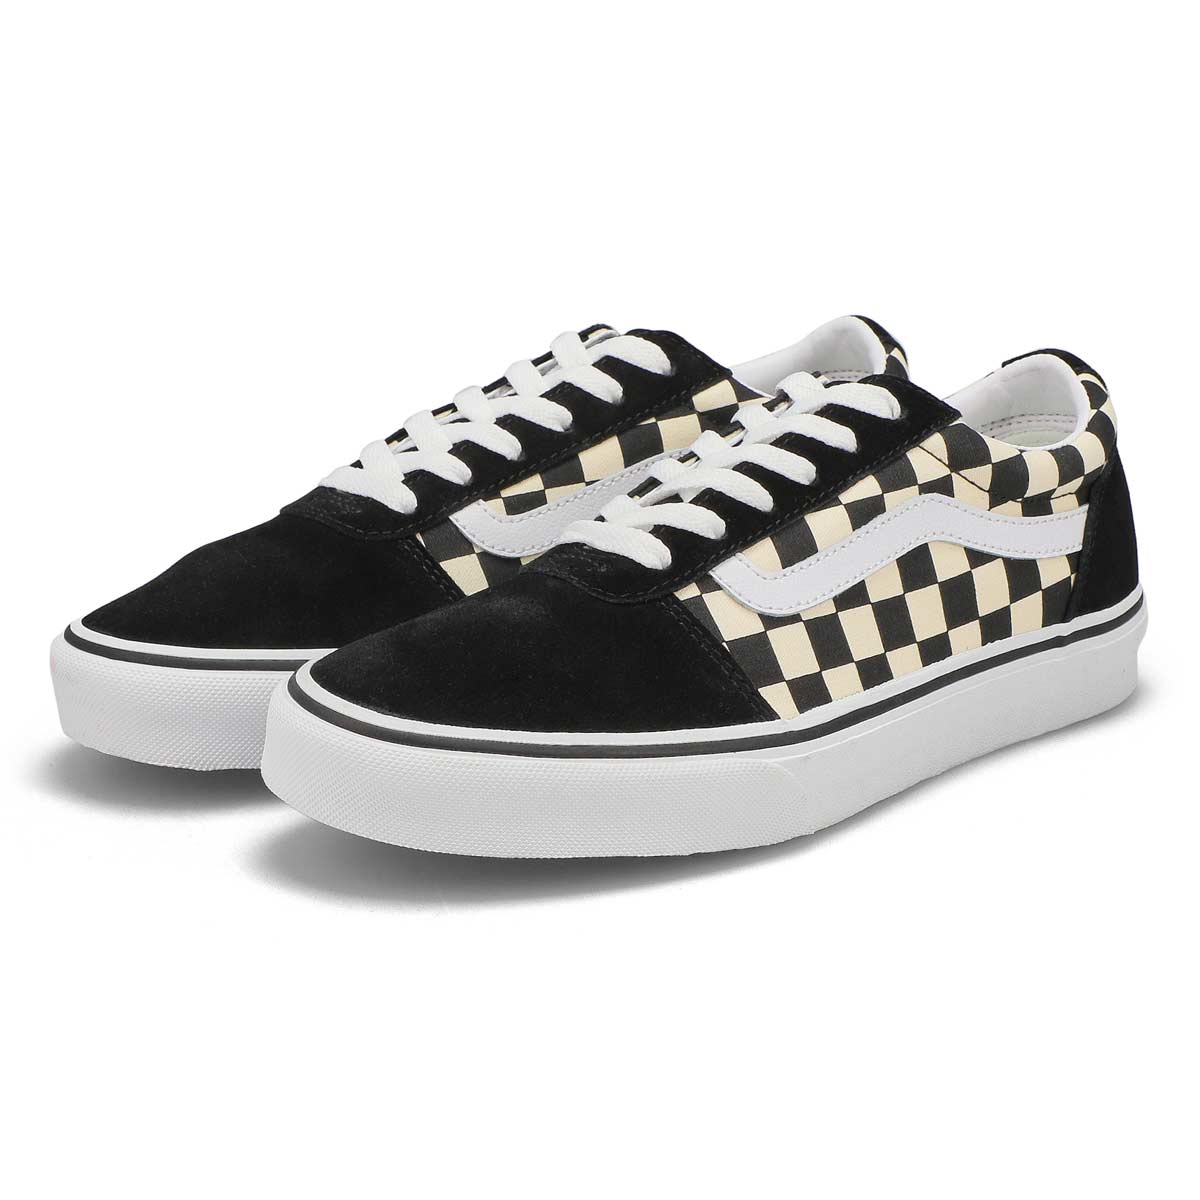 Vans Women's Ward Lace Up Sneaker - White/Whi | SoftMoc.com